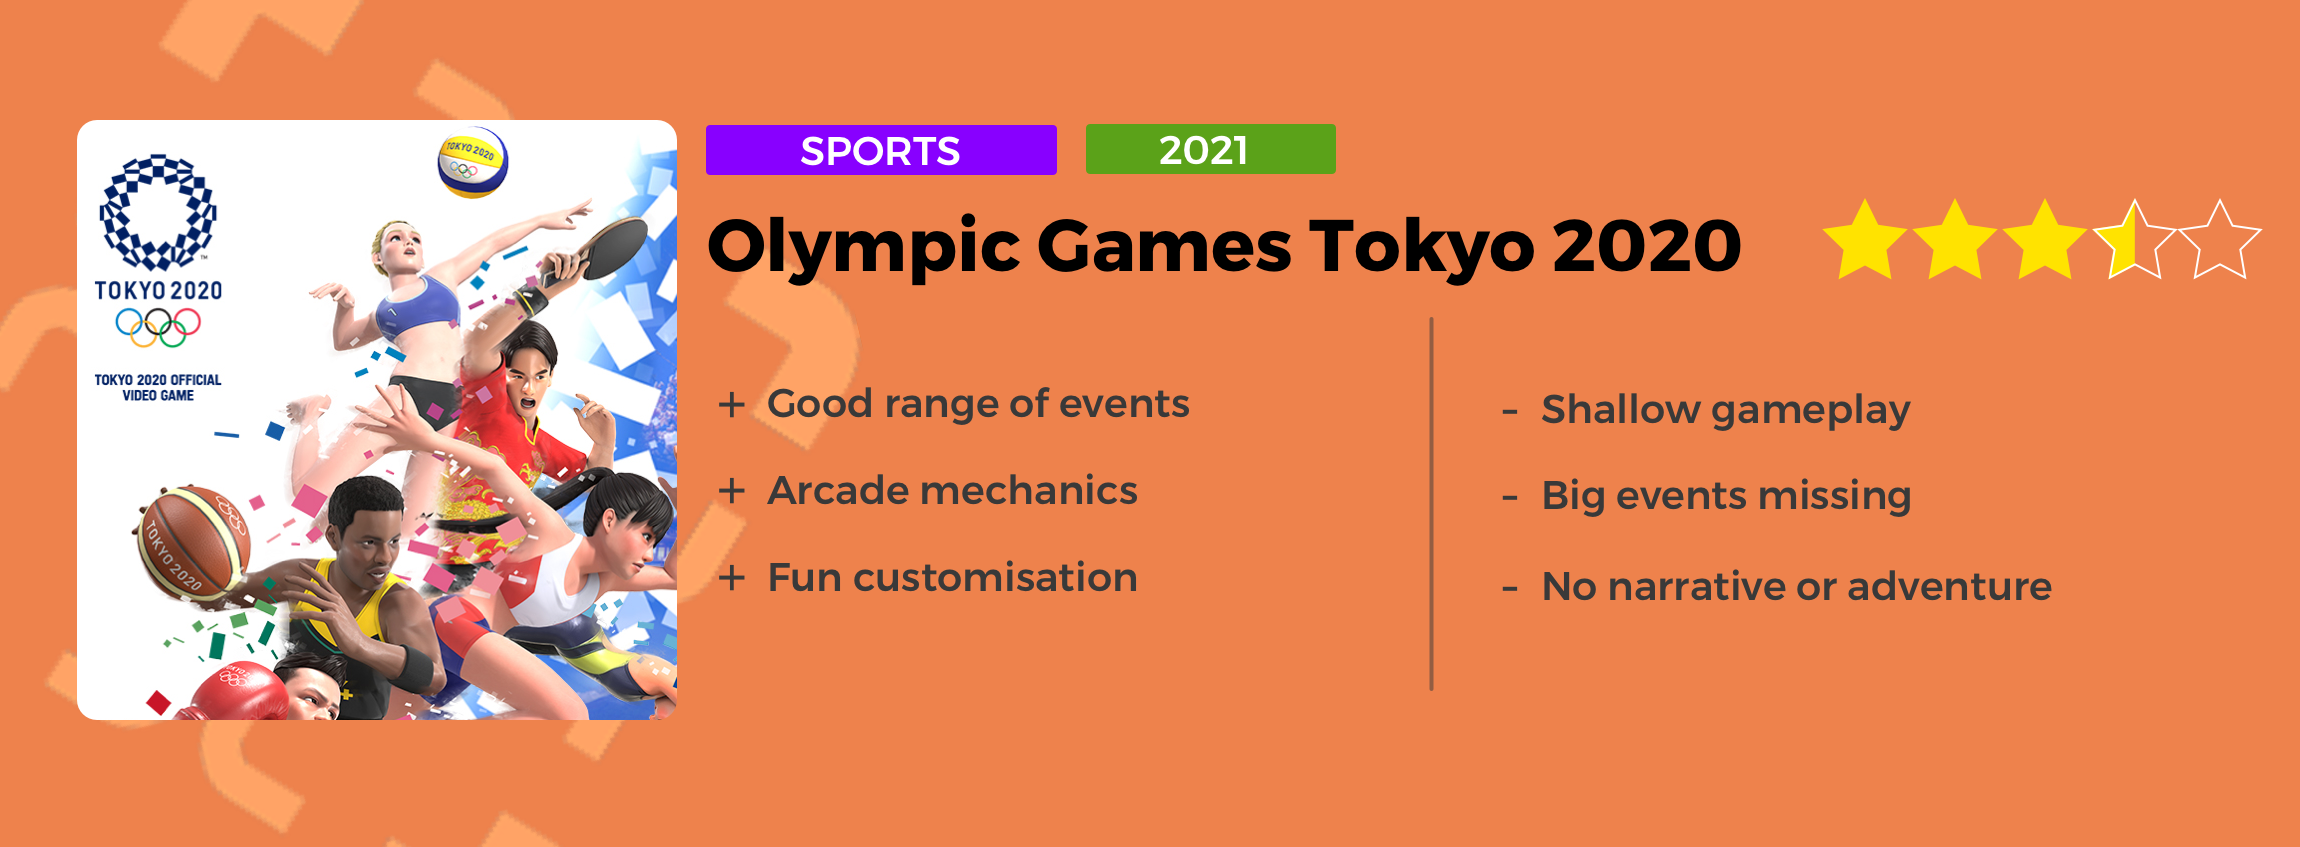 Olympic Games Tokyo 2020 Review - A Bronze Medal Performance